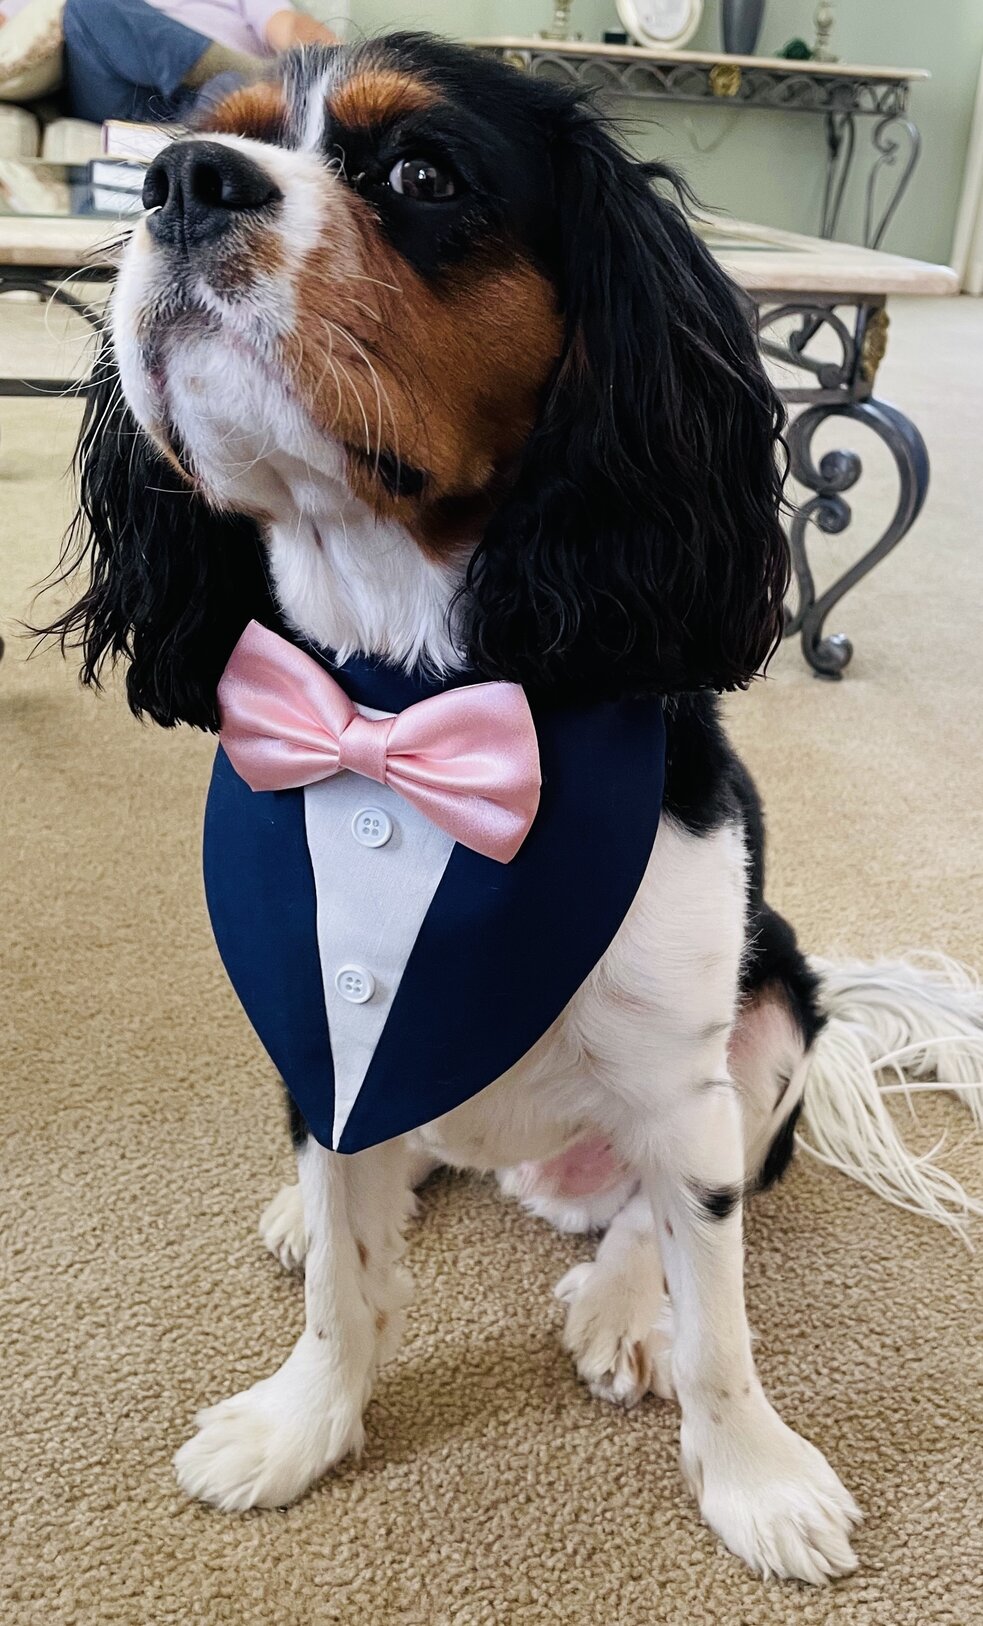 All dressed up and ready for Prom! Dress Your Pet contest entry photo